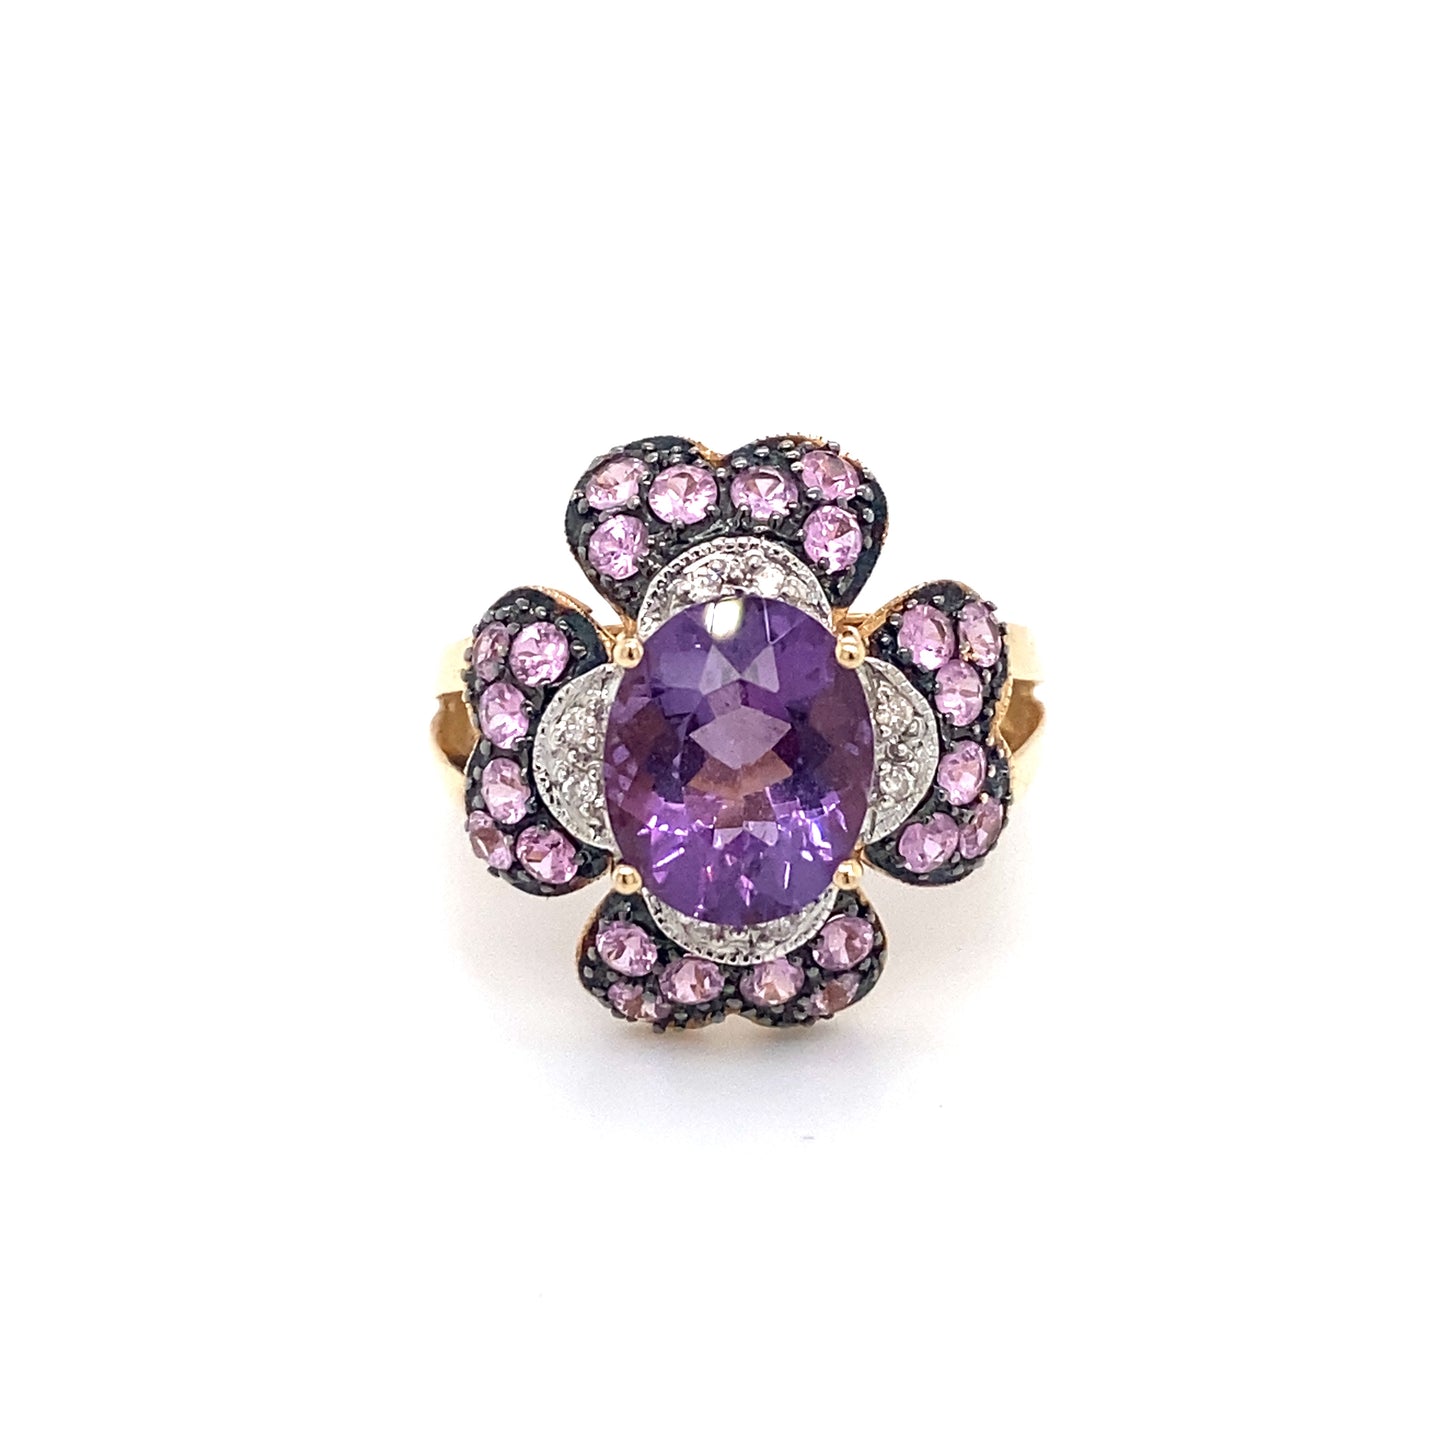 Circa 1990s Amethyst and Diamond Flower Cocktail Ring in 14K Gold